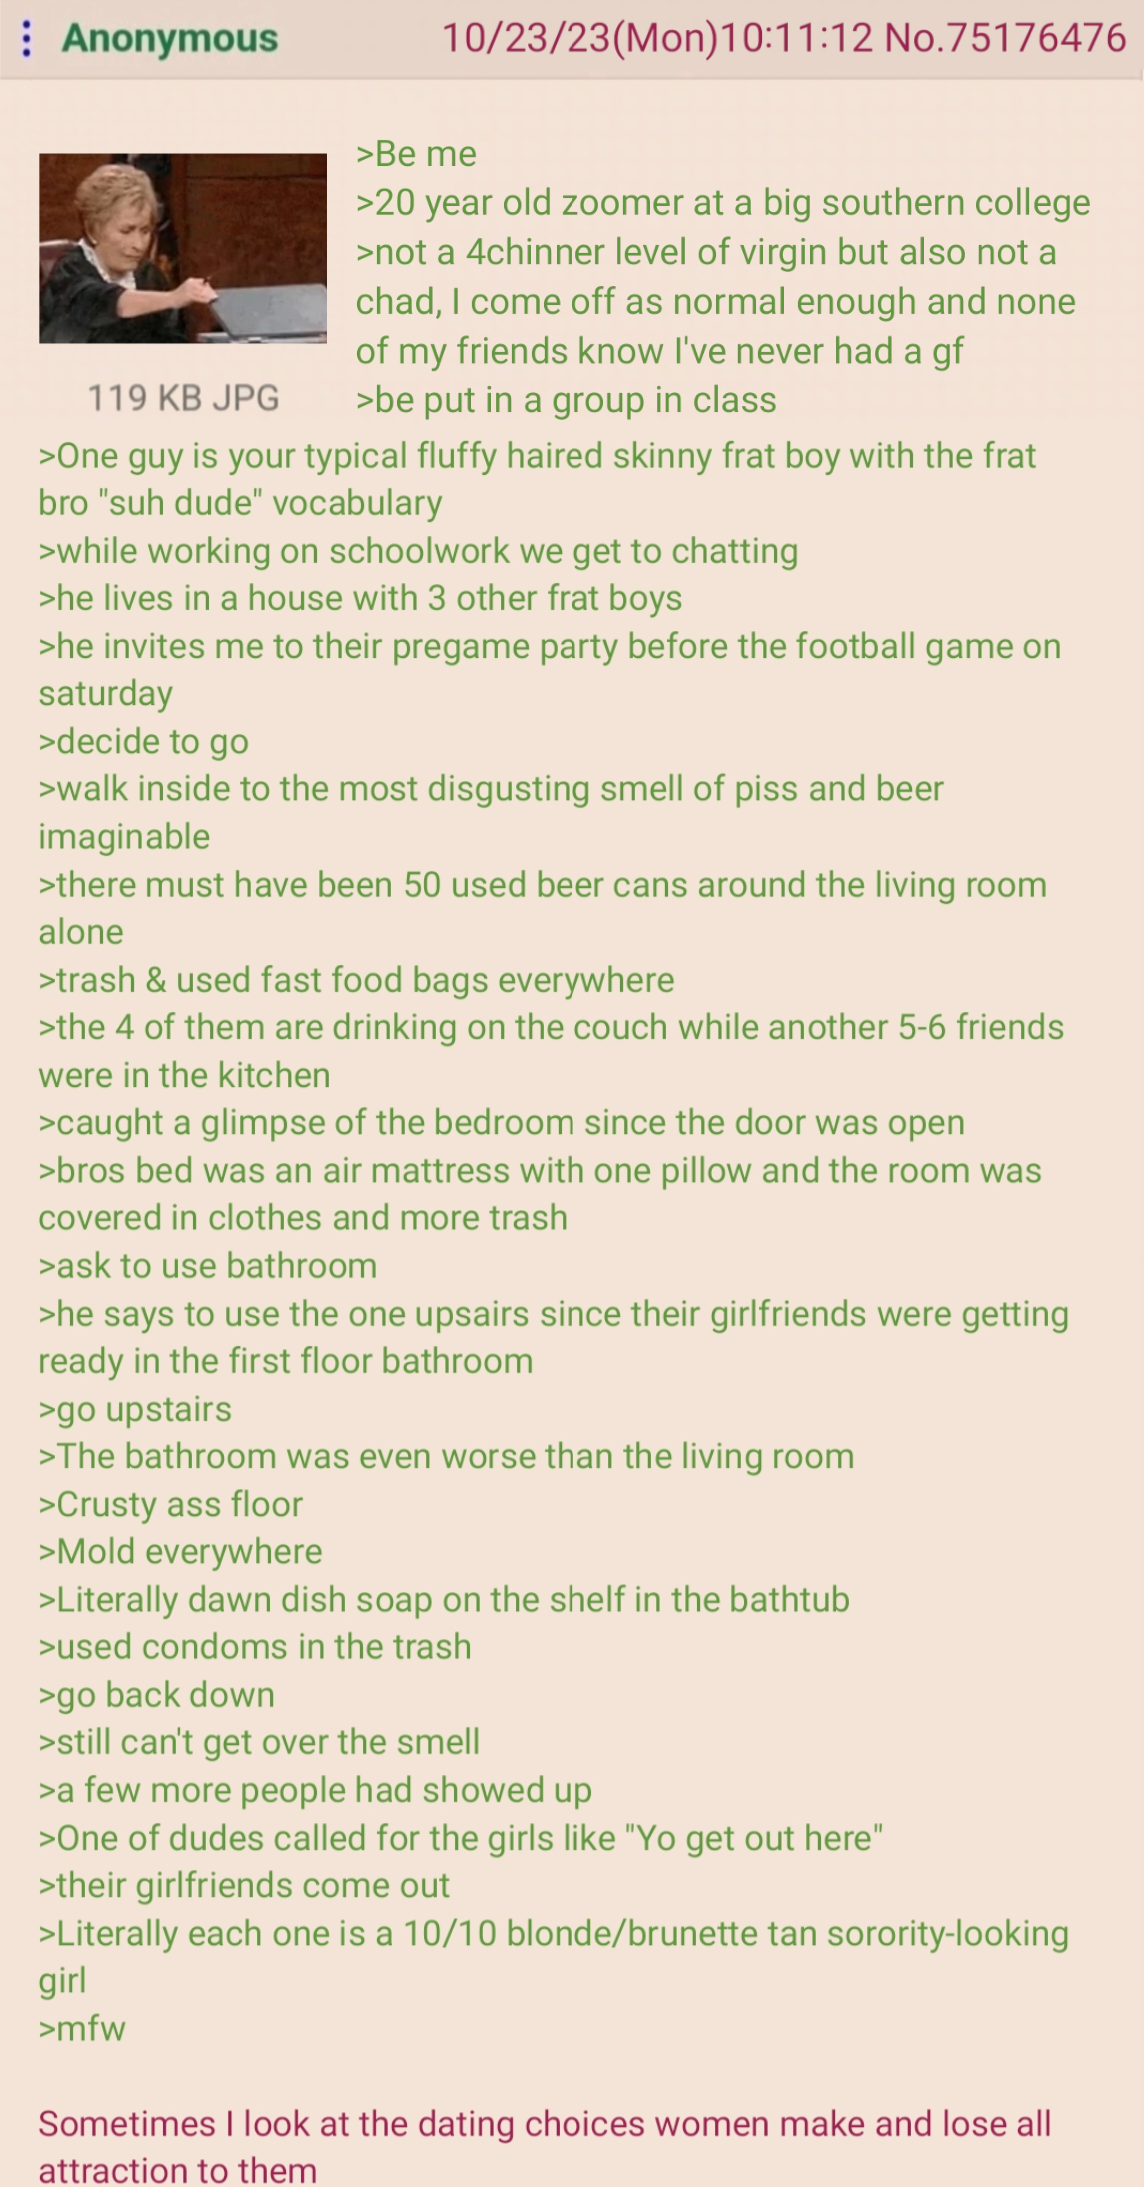 anon went to a party